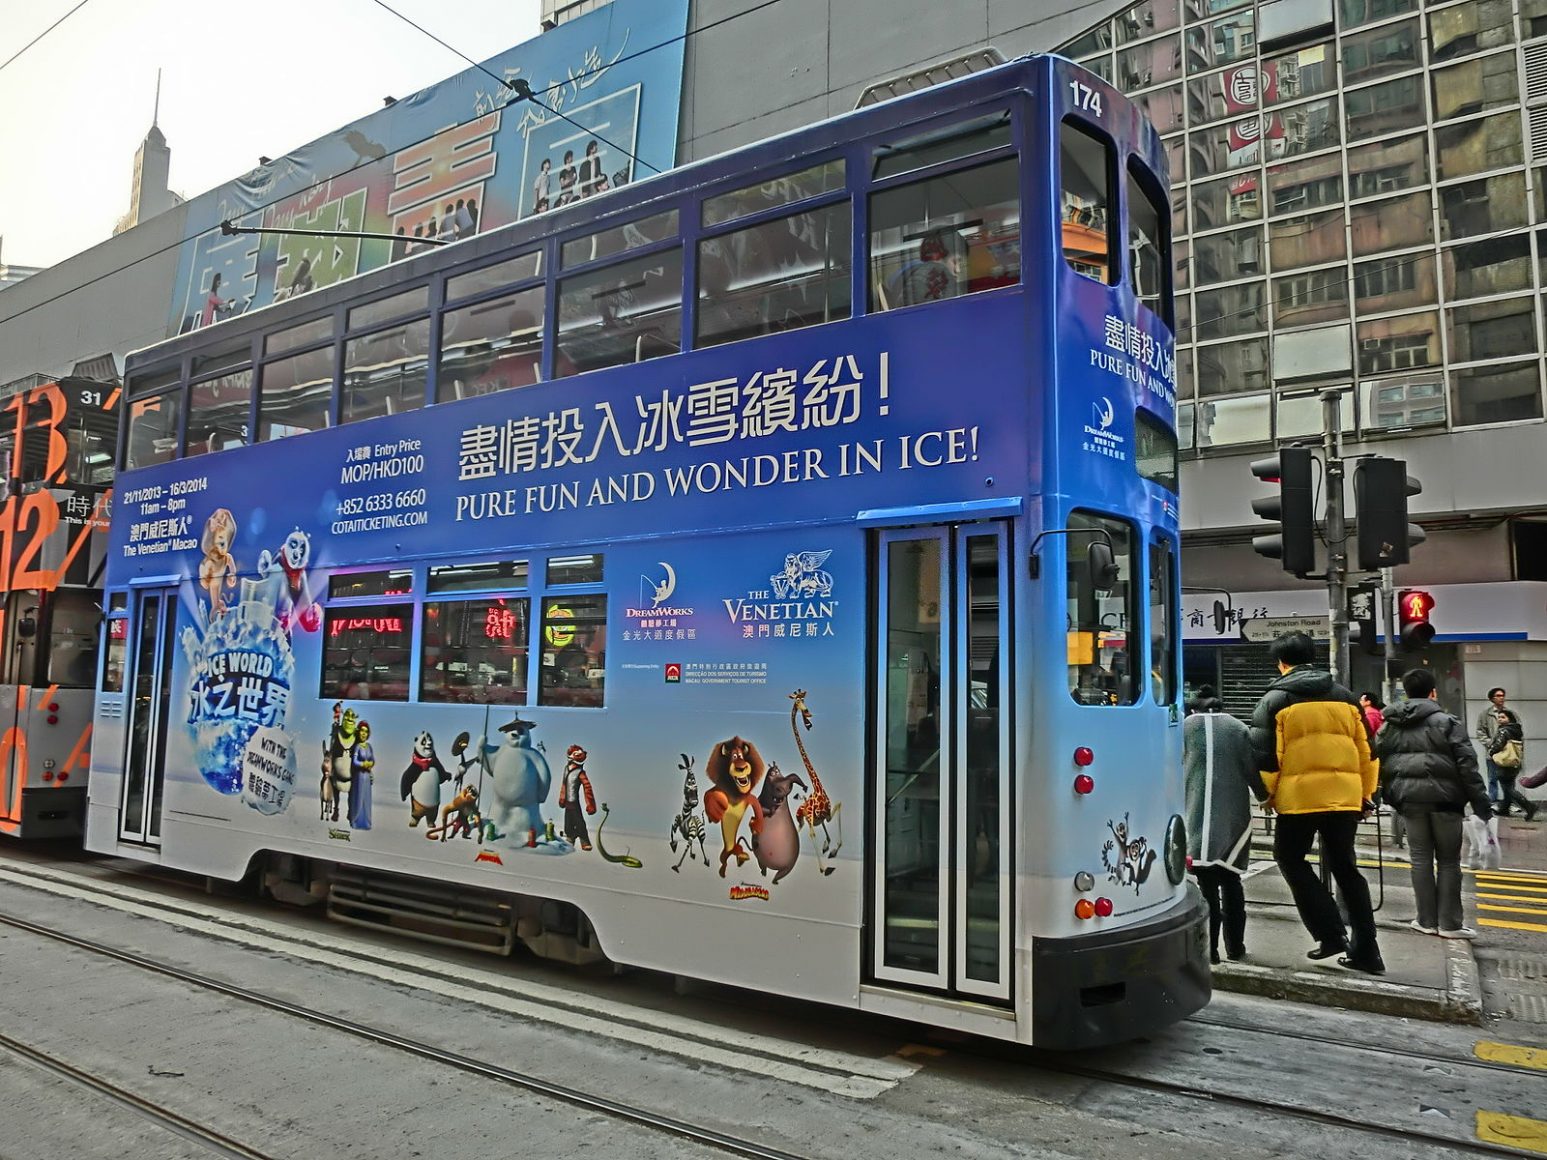 A streetcar ad for the Kung Fu Panda Adventure Ice World with the DreamWorks All-Stars exhibition.